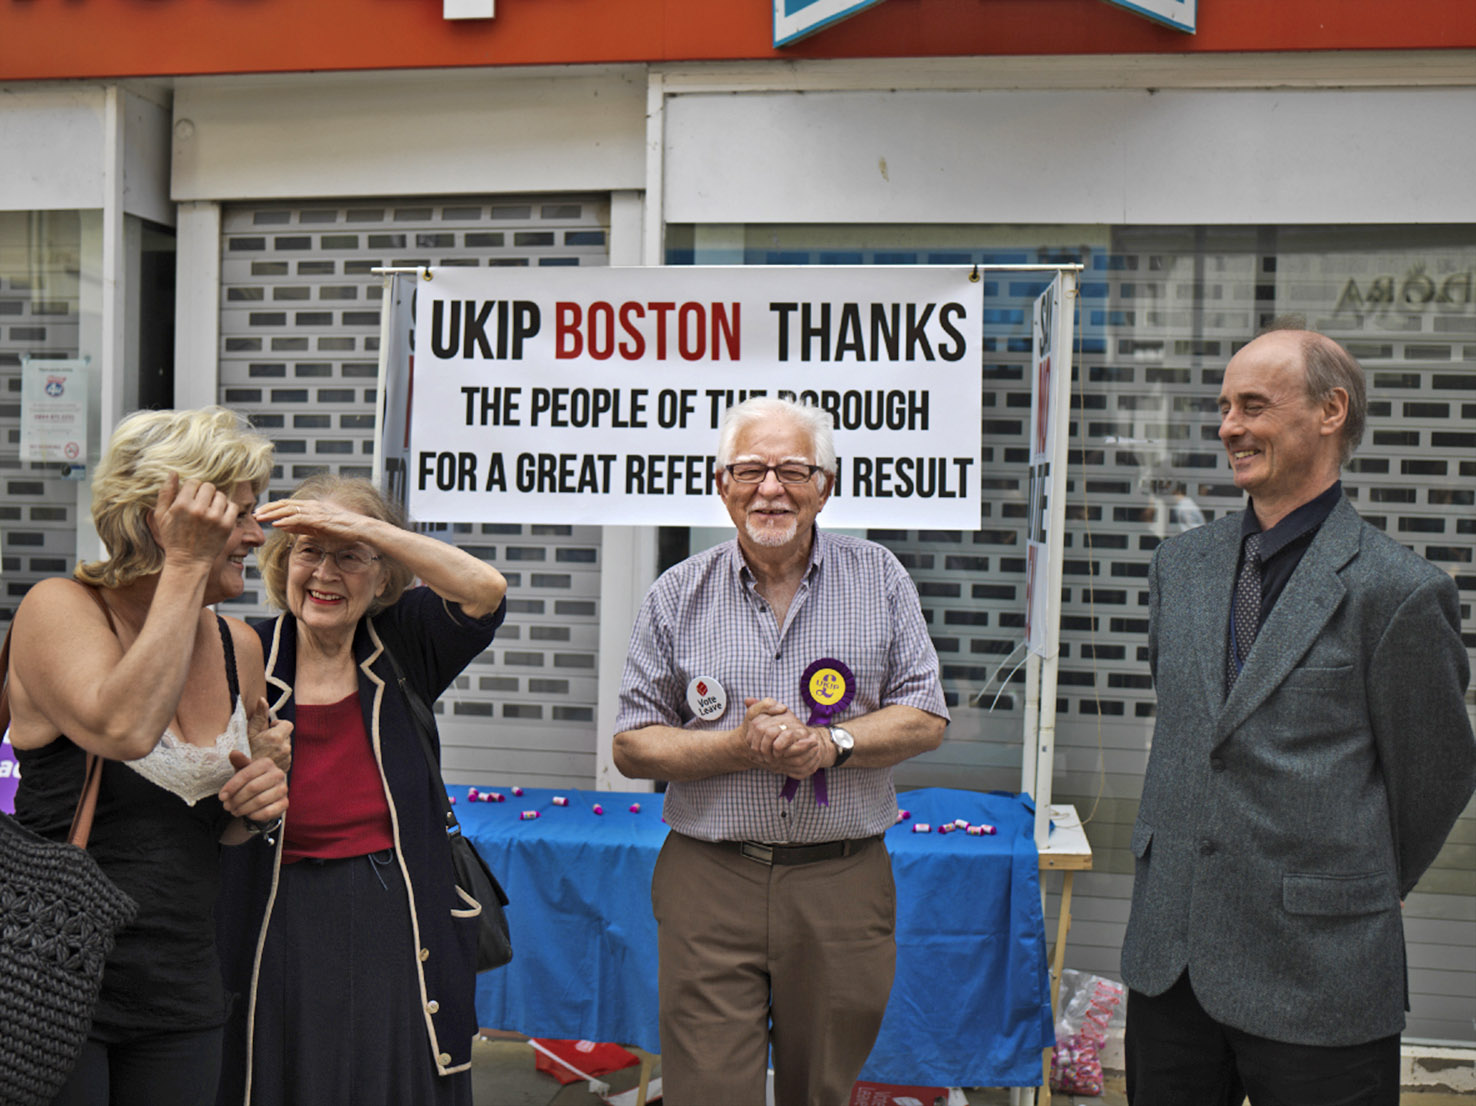 "We want Britain to be back to the old way," says Brian Rush age 72, who handed out sweets (candies) to celebrate the results of the referendum. "The EU is too dictating so we're very happy to have won," Boston, Lincolnshire, June 25, 2016.